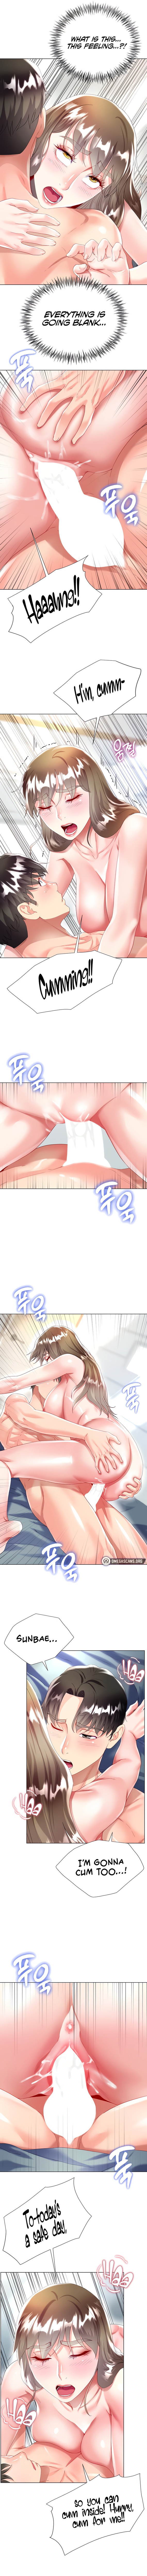 my-sister-in-laws-skirt-chap-32-6